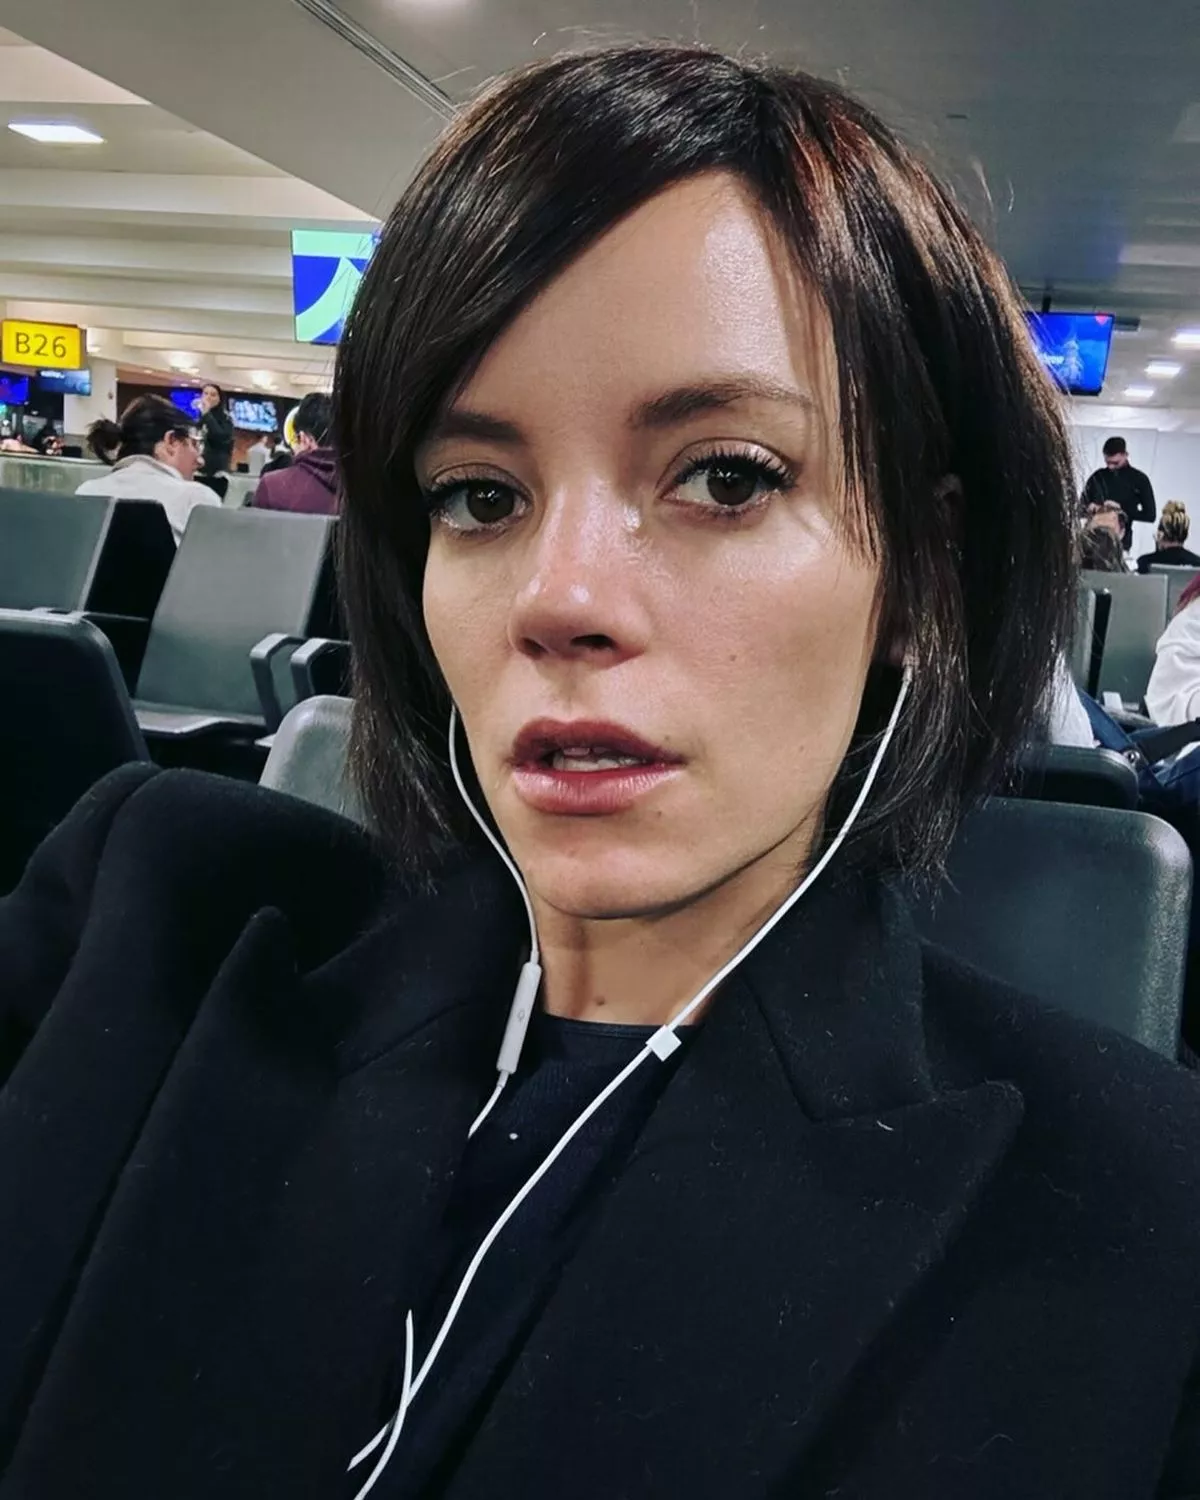 Lily Allen Became A Member Of The Mile-high Club Following A Seven-hour Encounter With A 90s Rockstar